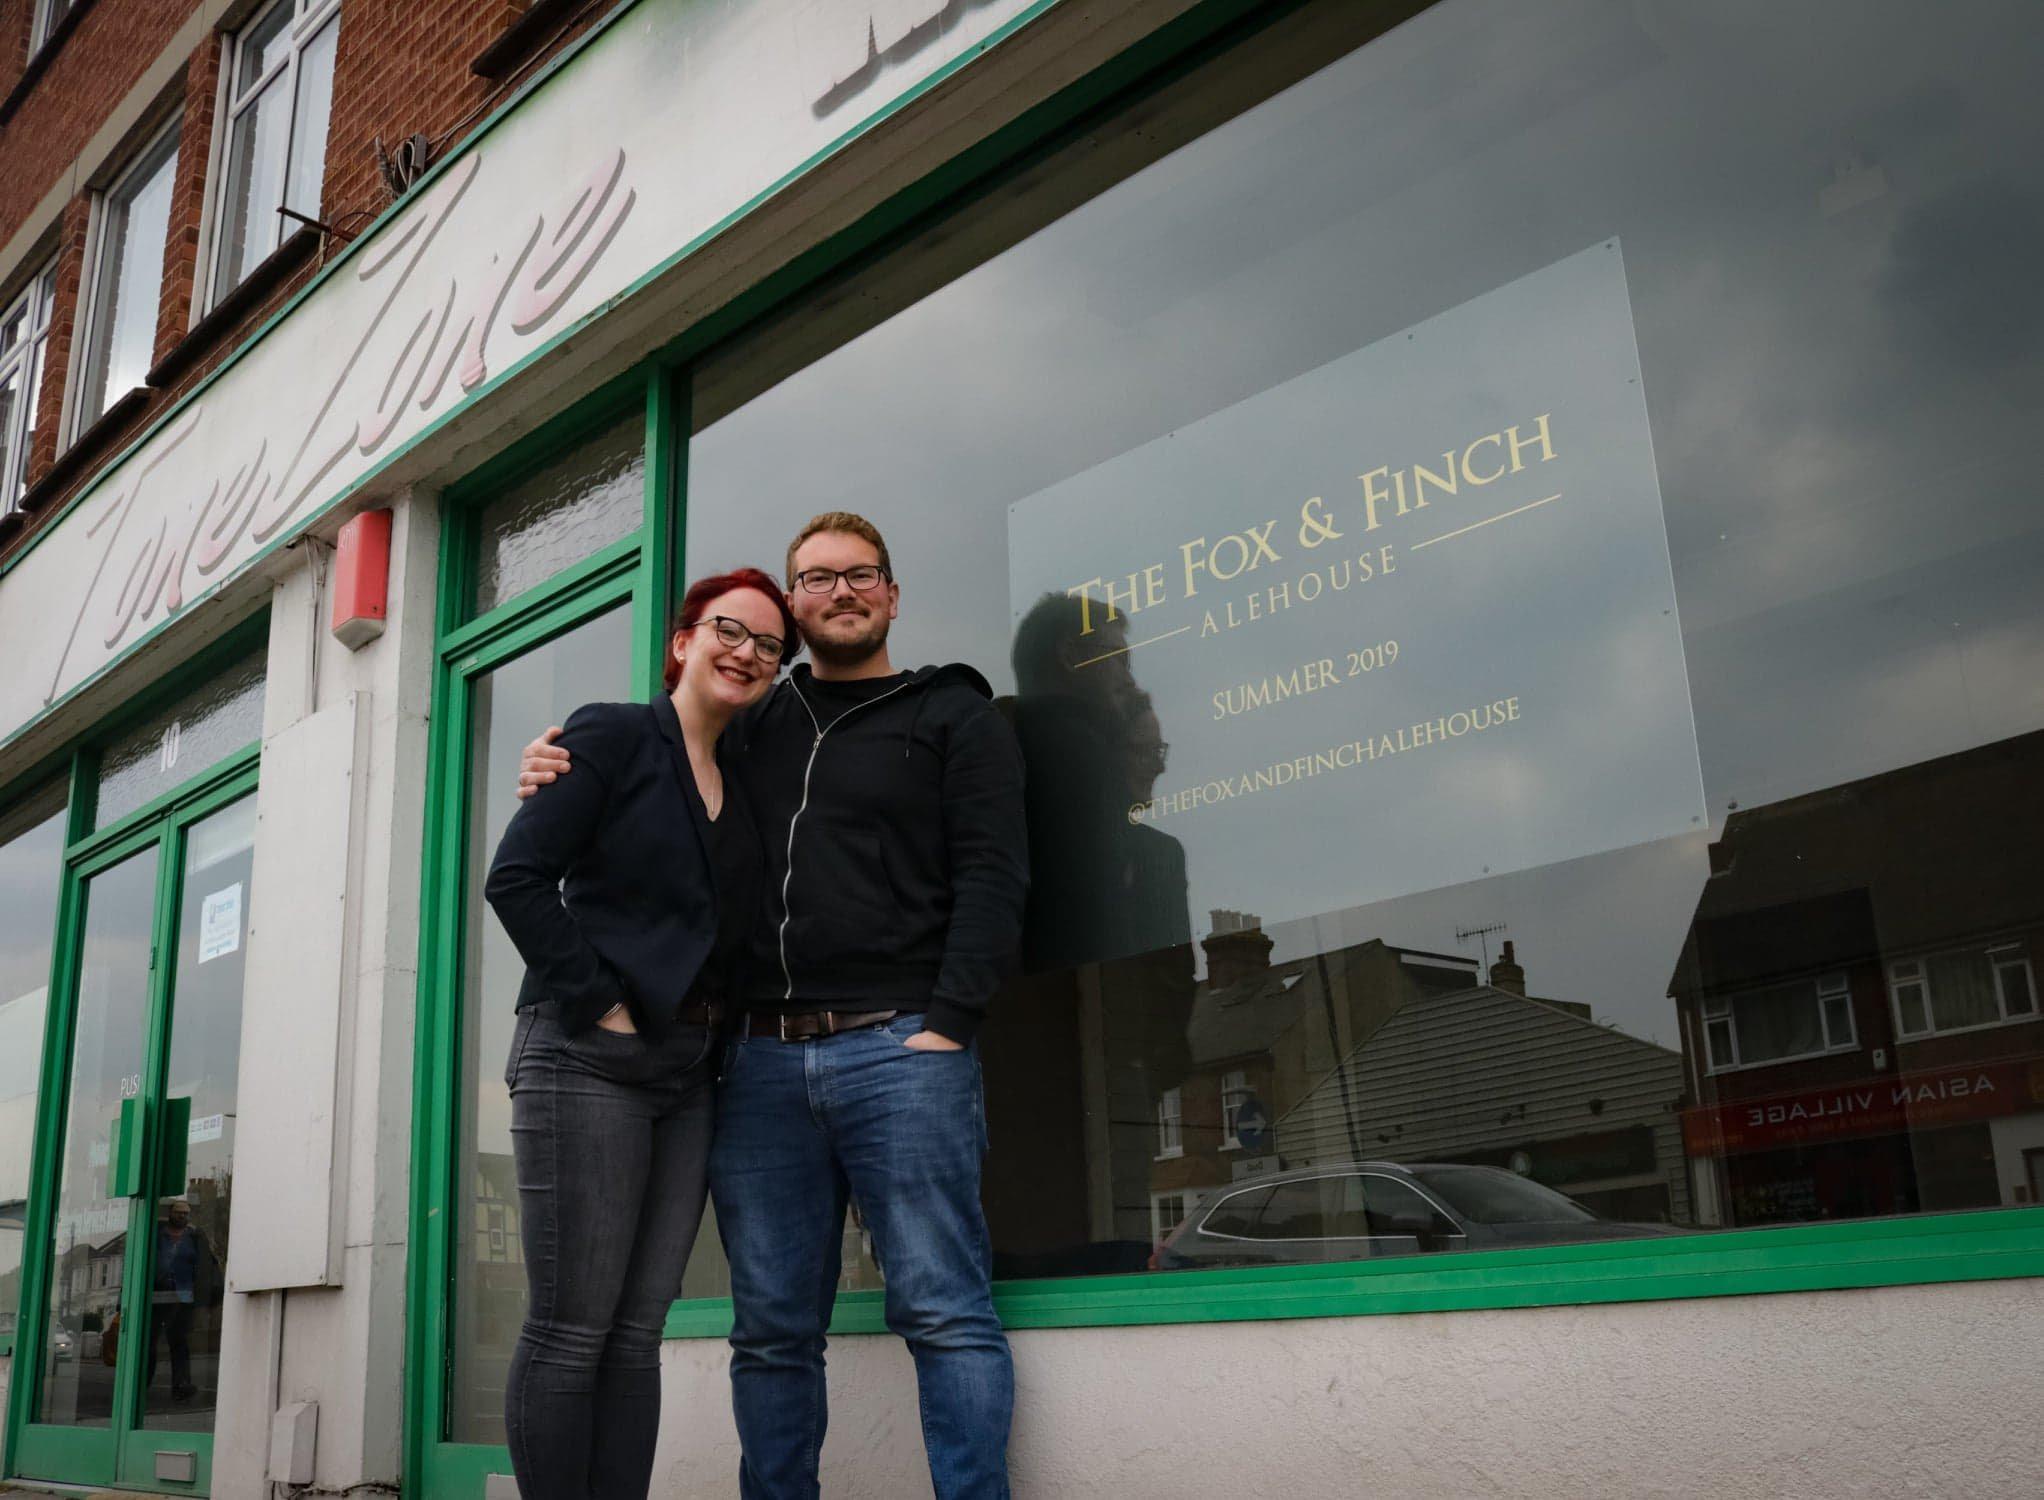 The Fox & Finch owners Mike and Joanne Saveen before the opening